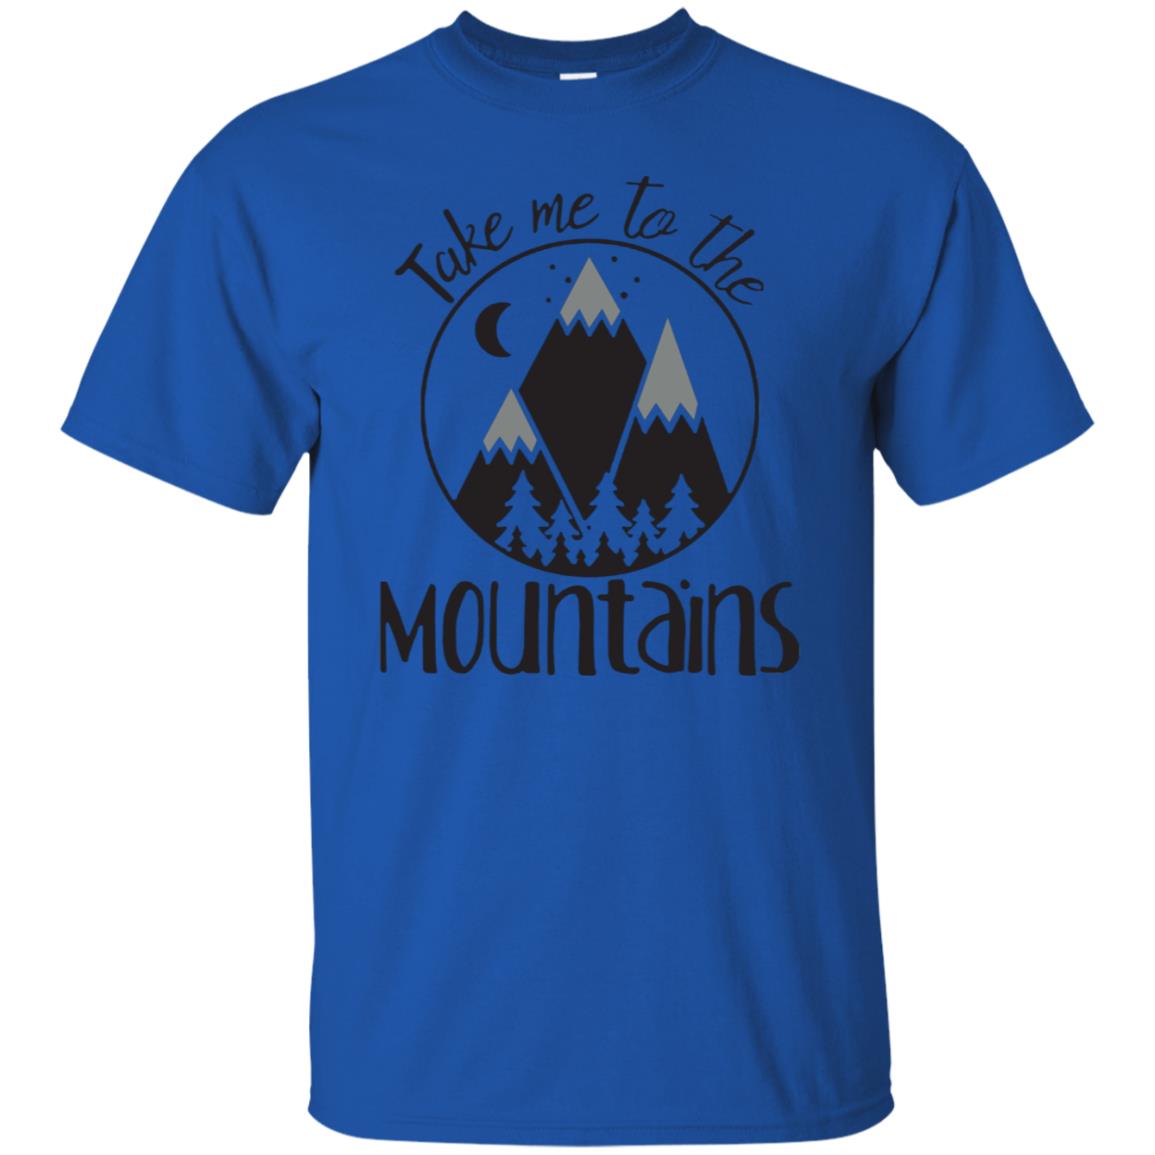 Take Me To The Mountains Shirt - 10% Off - FavorMerch